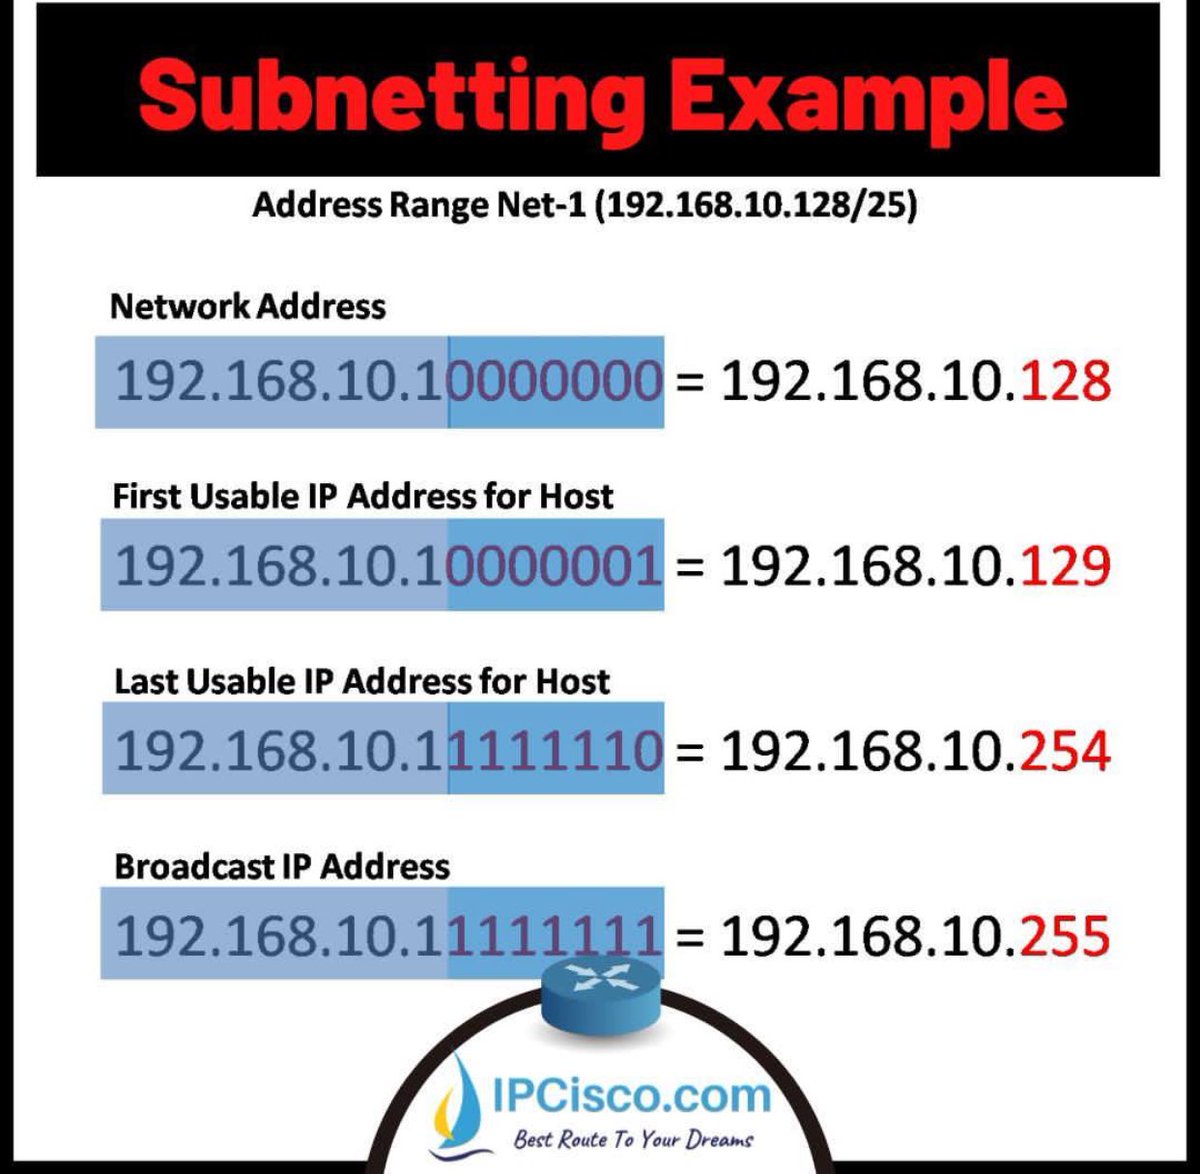 Subnetting Examples Are Important! | IPCisco
.
Please Like & Retweet..:)
.
#network #cisco #ccna